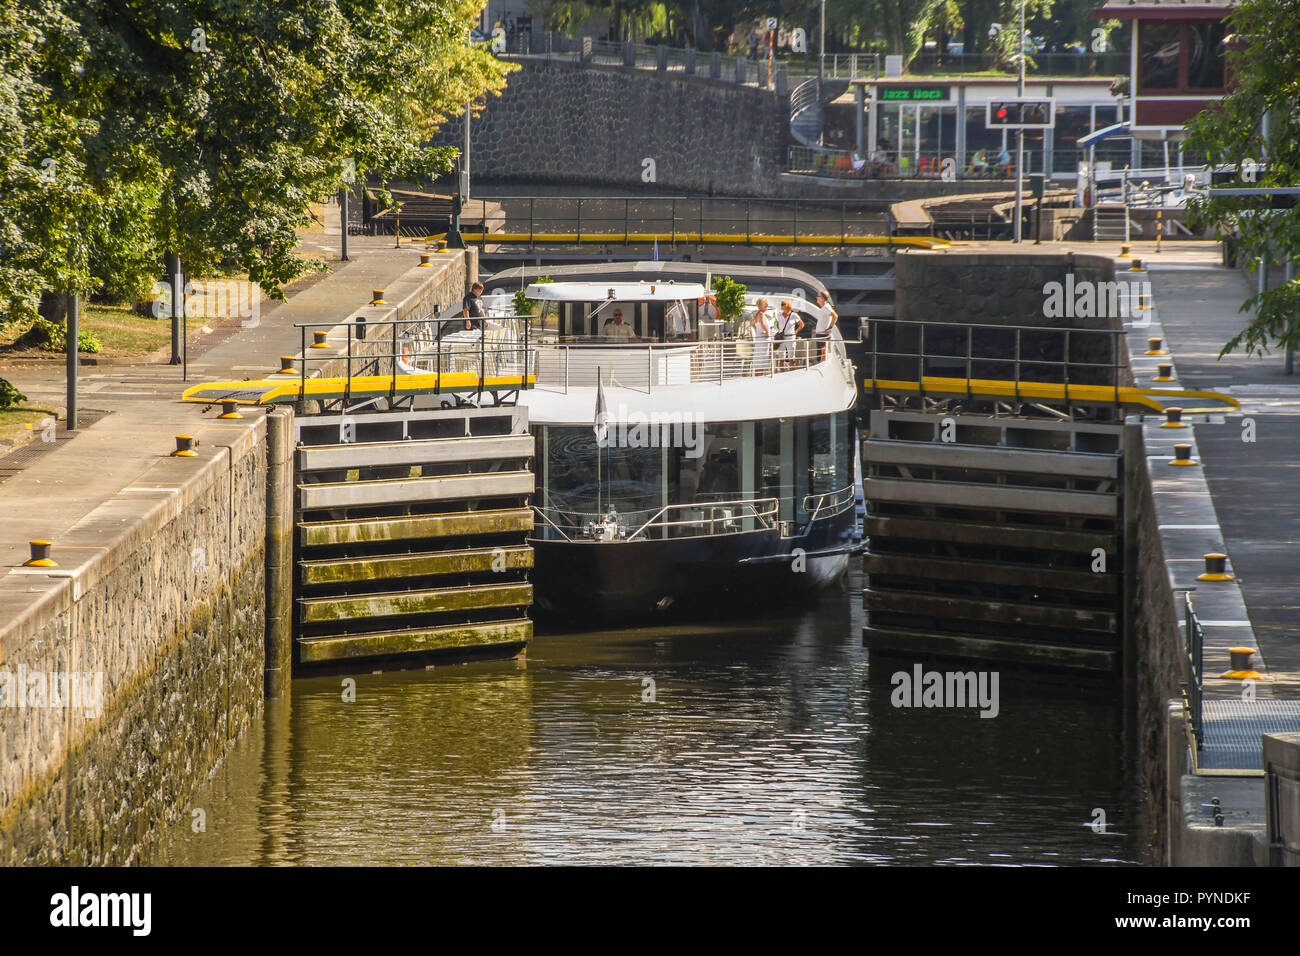 Tourist sightseeing boat in a lock on the River Vltava in the centre of Prague Stock Photo